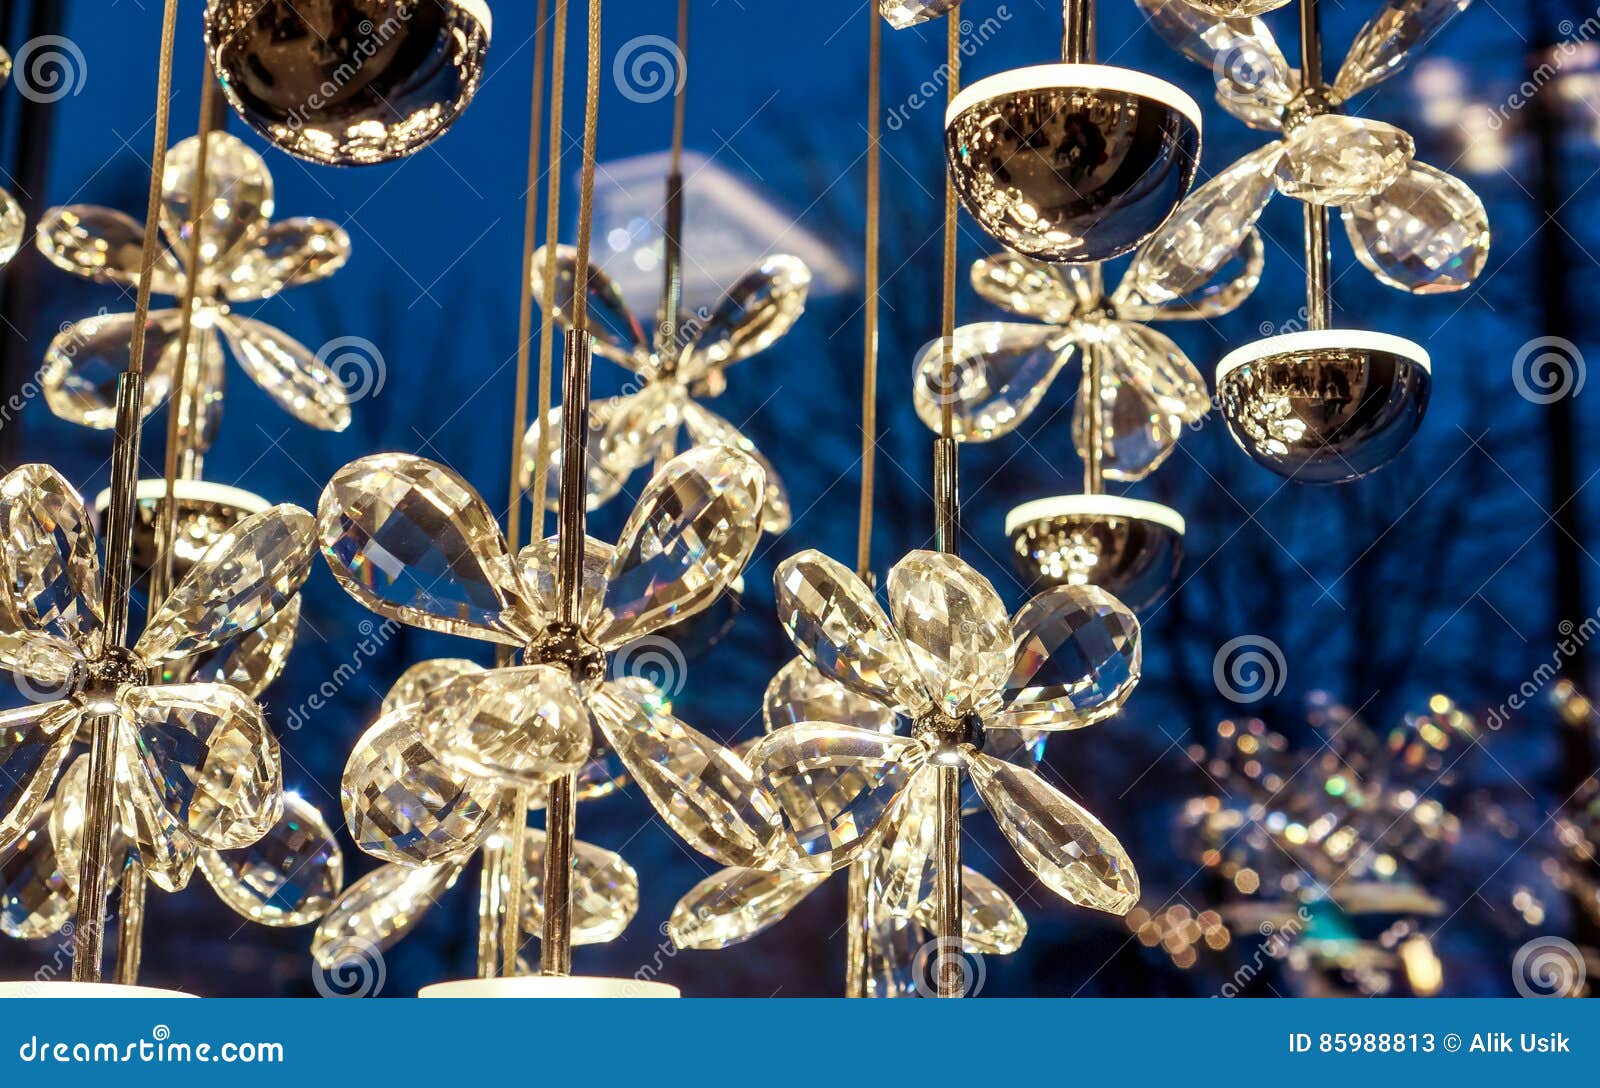 Clear Crystal Butterfly As Part Of Luxury Lamp Stock Image Image